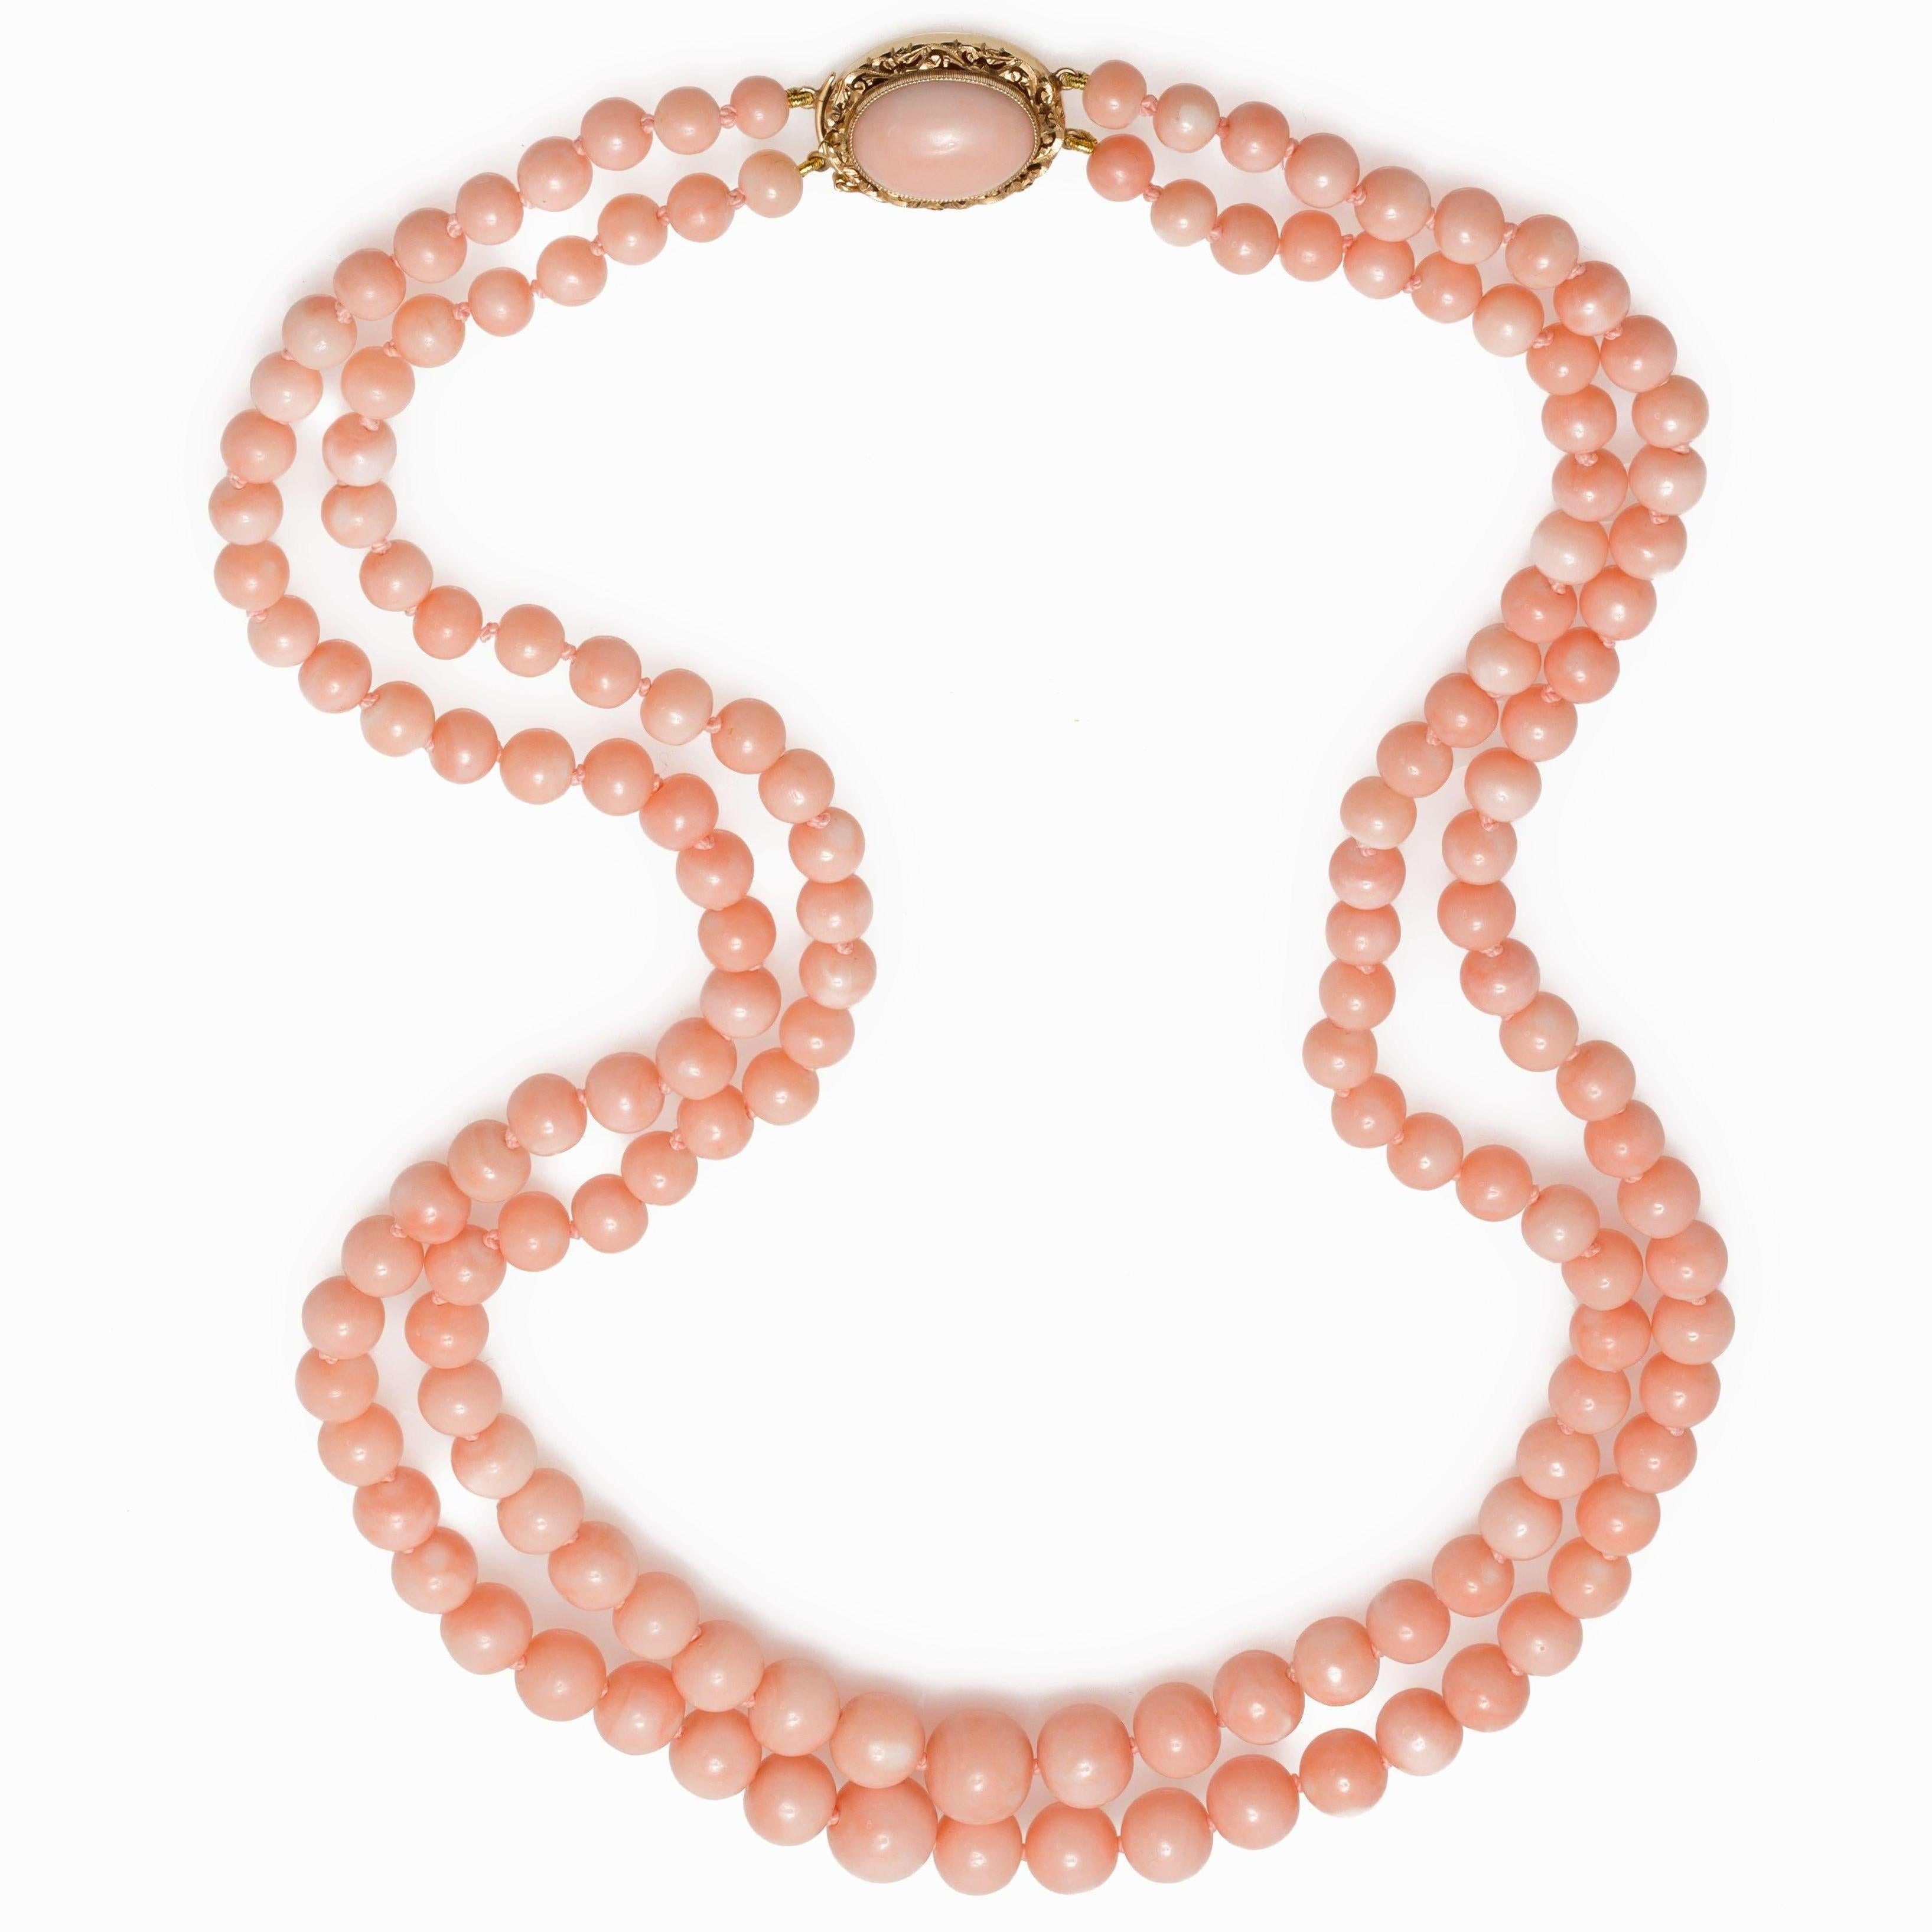 A vintage double strand Angel Skin Coral necklace circa 1960, with oval medallion in 18K yellow gold clasp. Crafted during the mid-century period, this double strand beaded necklace features original Angel Skin Corals of very high quality and very